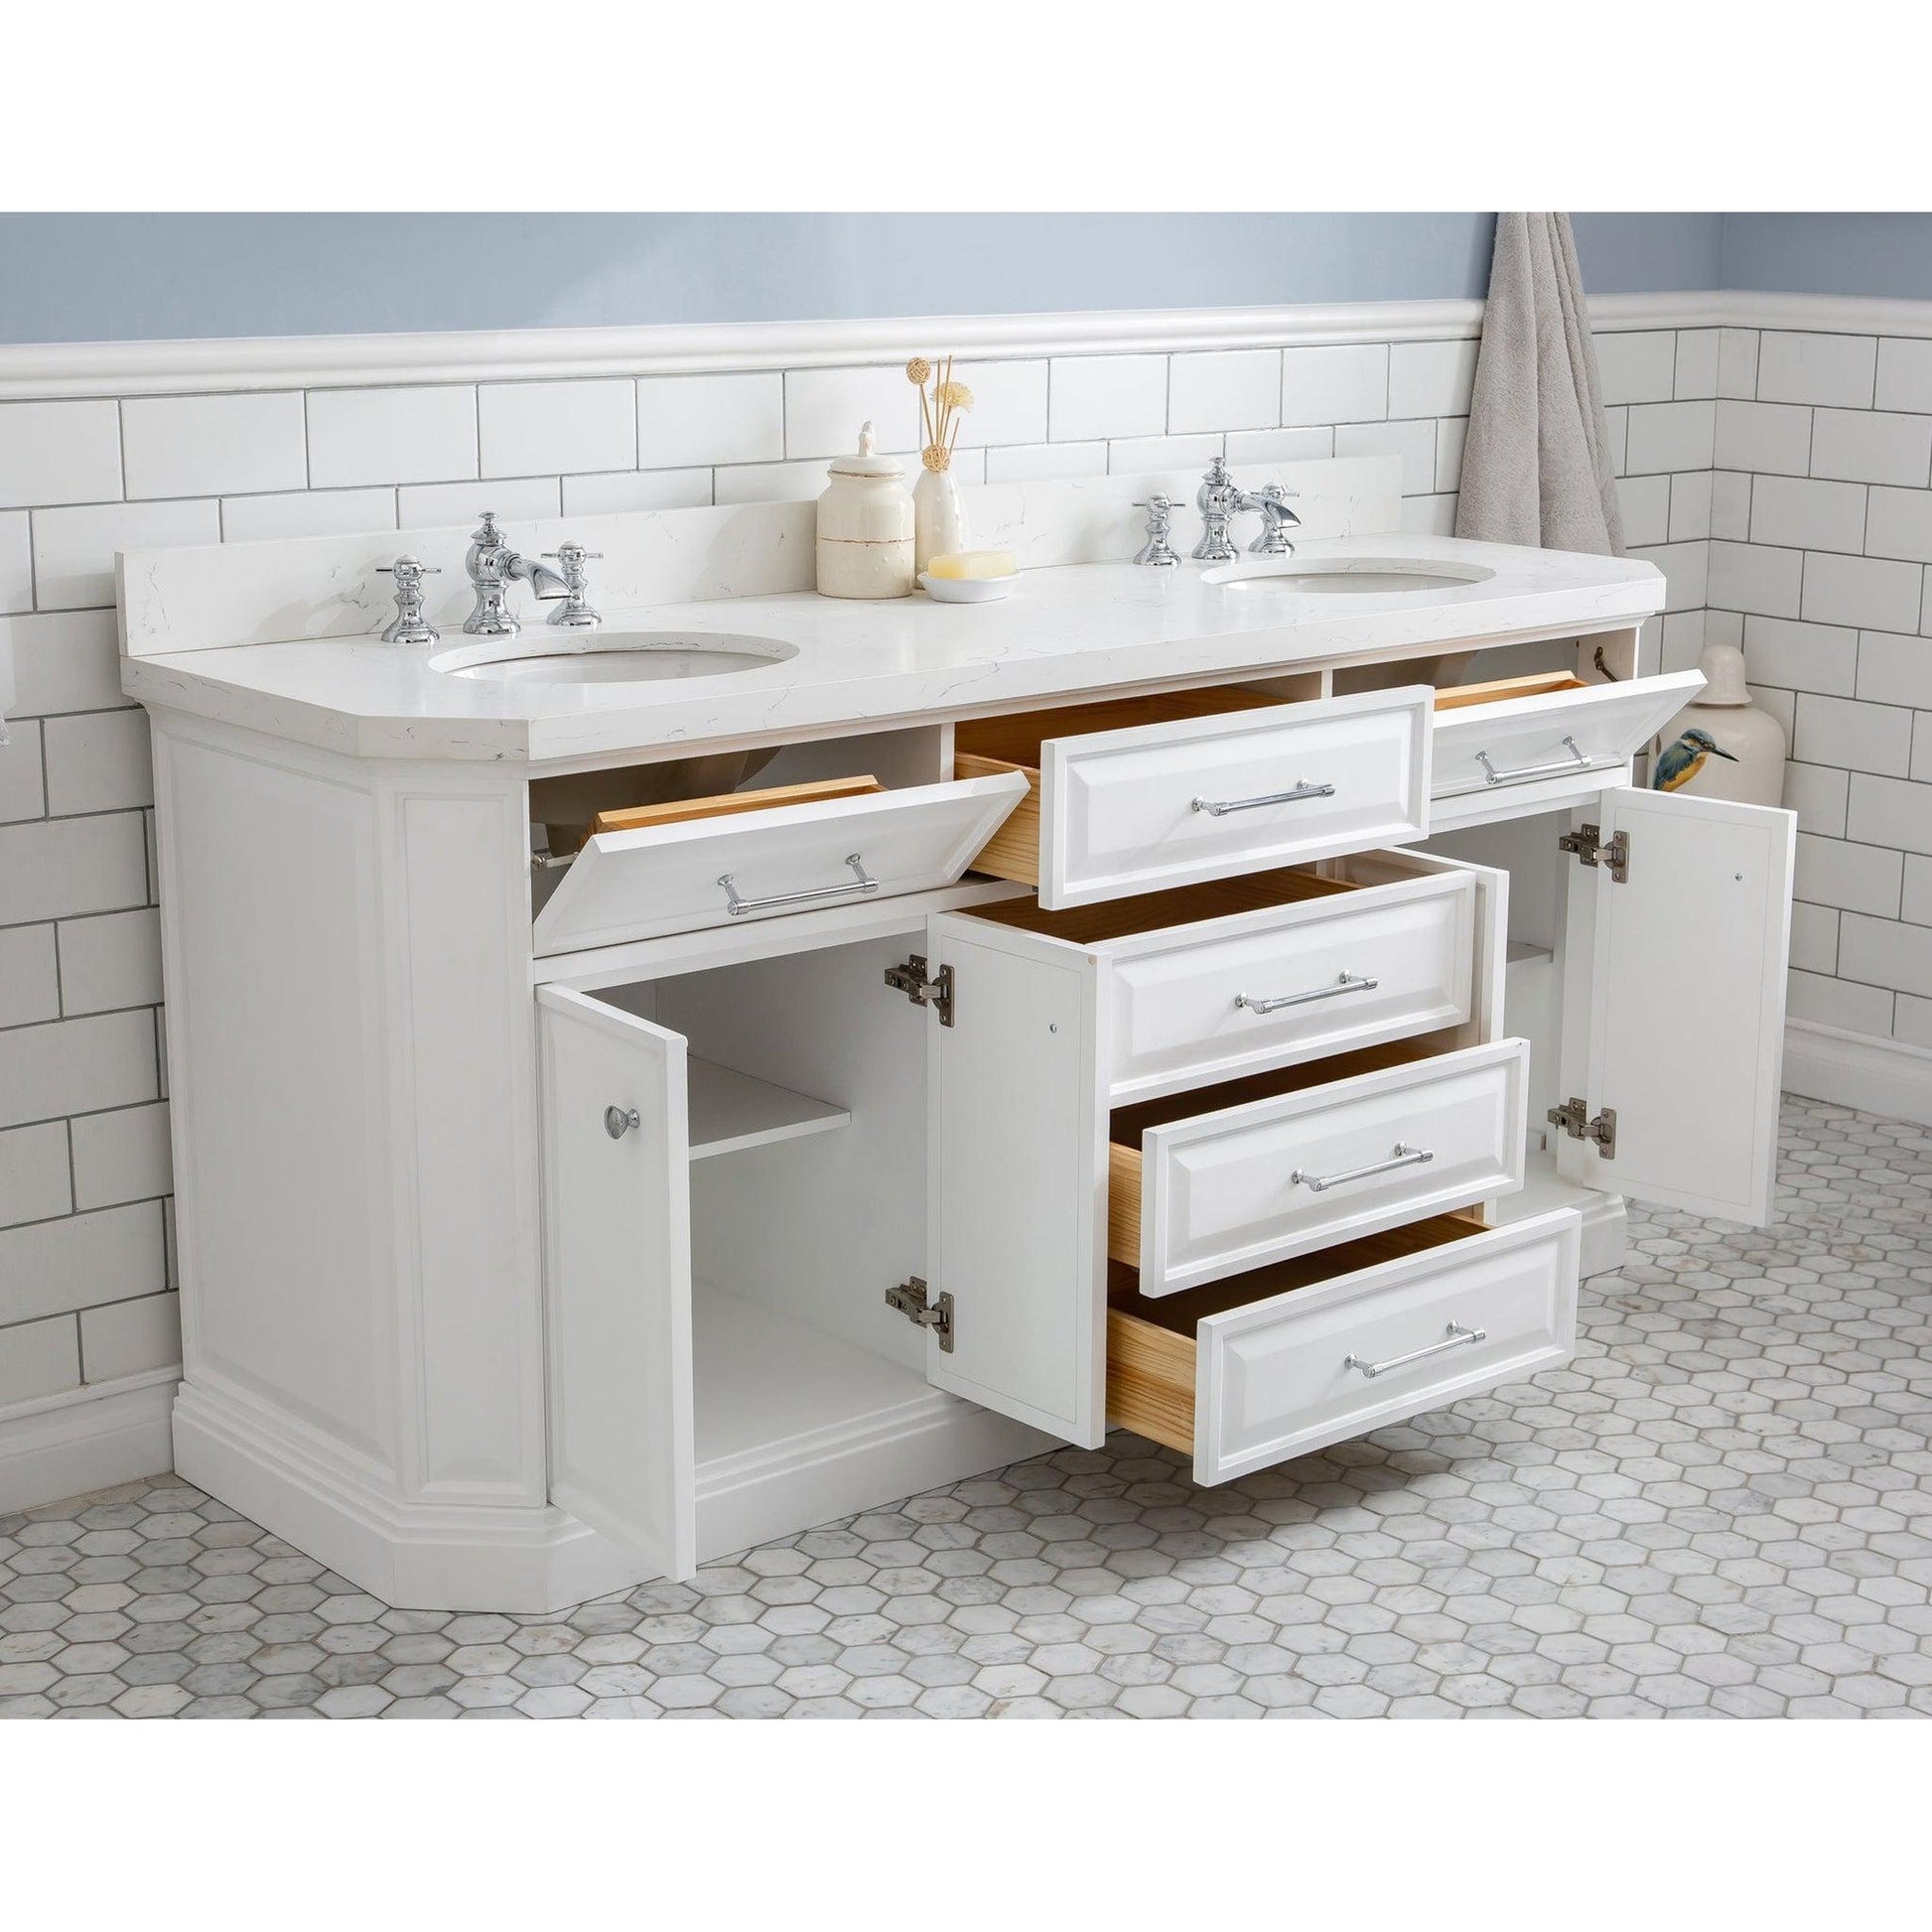 Water Creation Palace 72" Quartz Carrara Pure White Bathroom Vanity Set With Hardware And F2-0013 Faucets in Chrome Finish